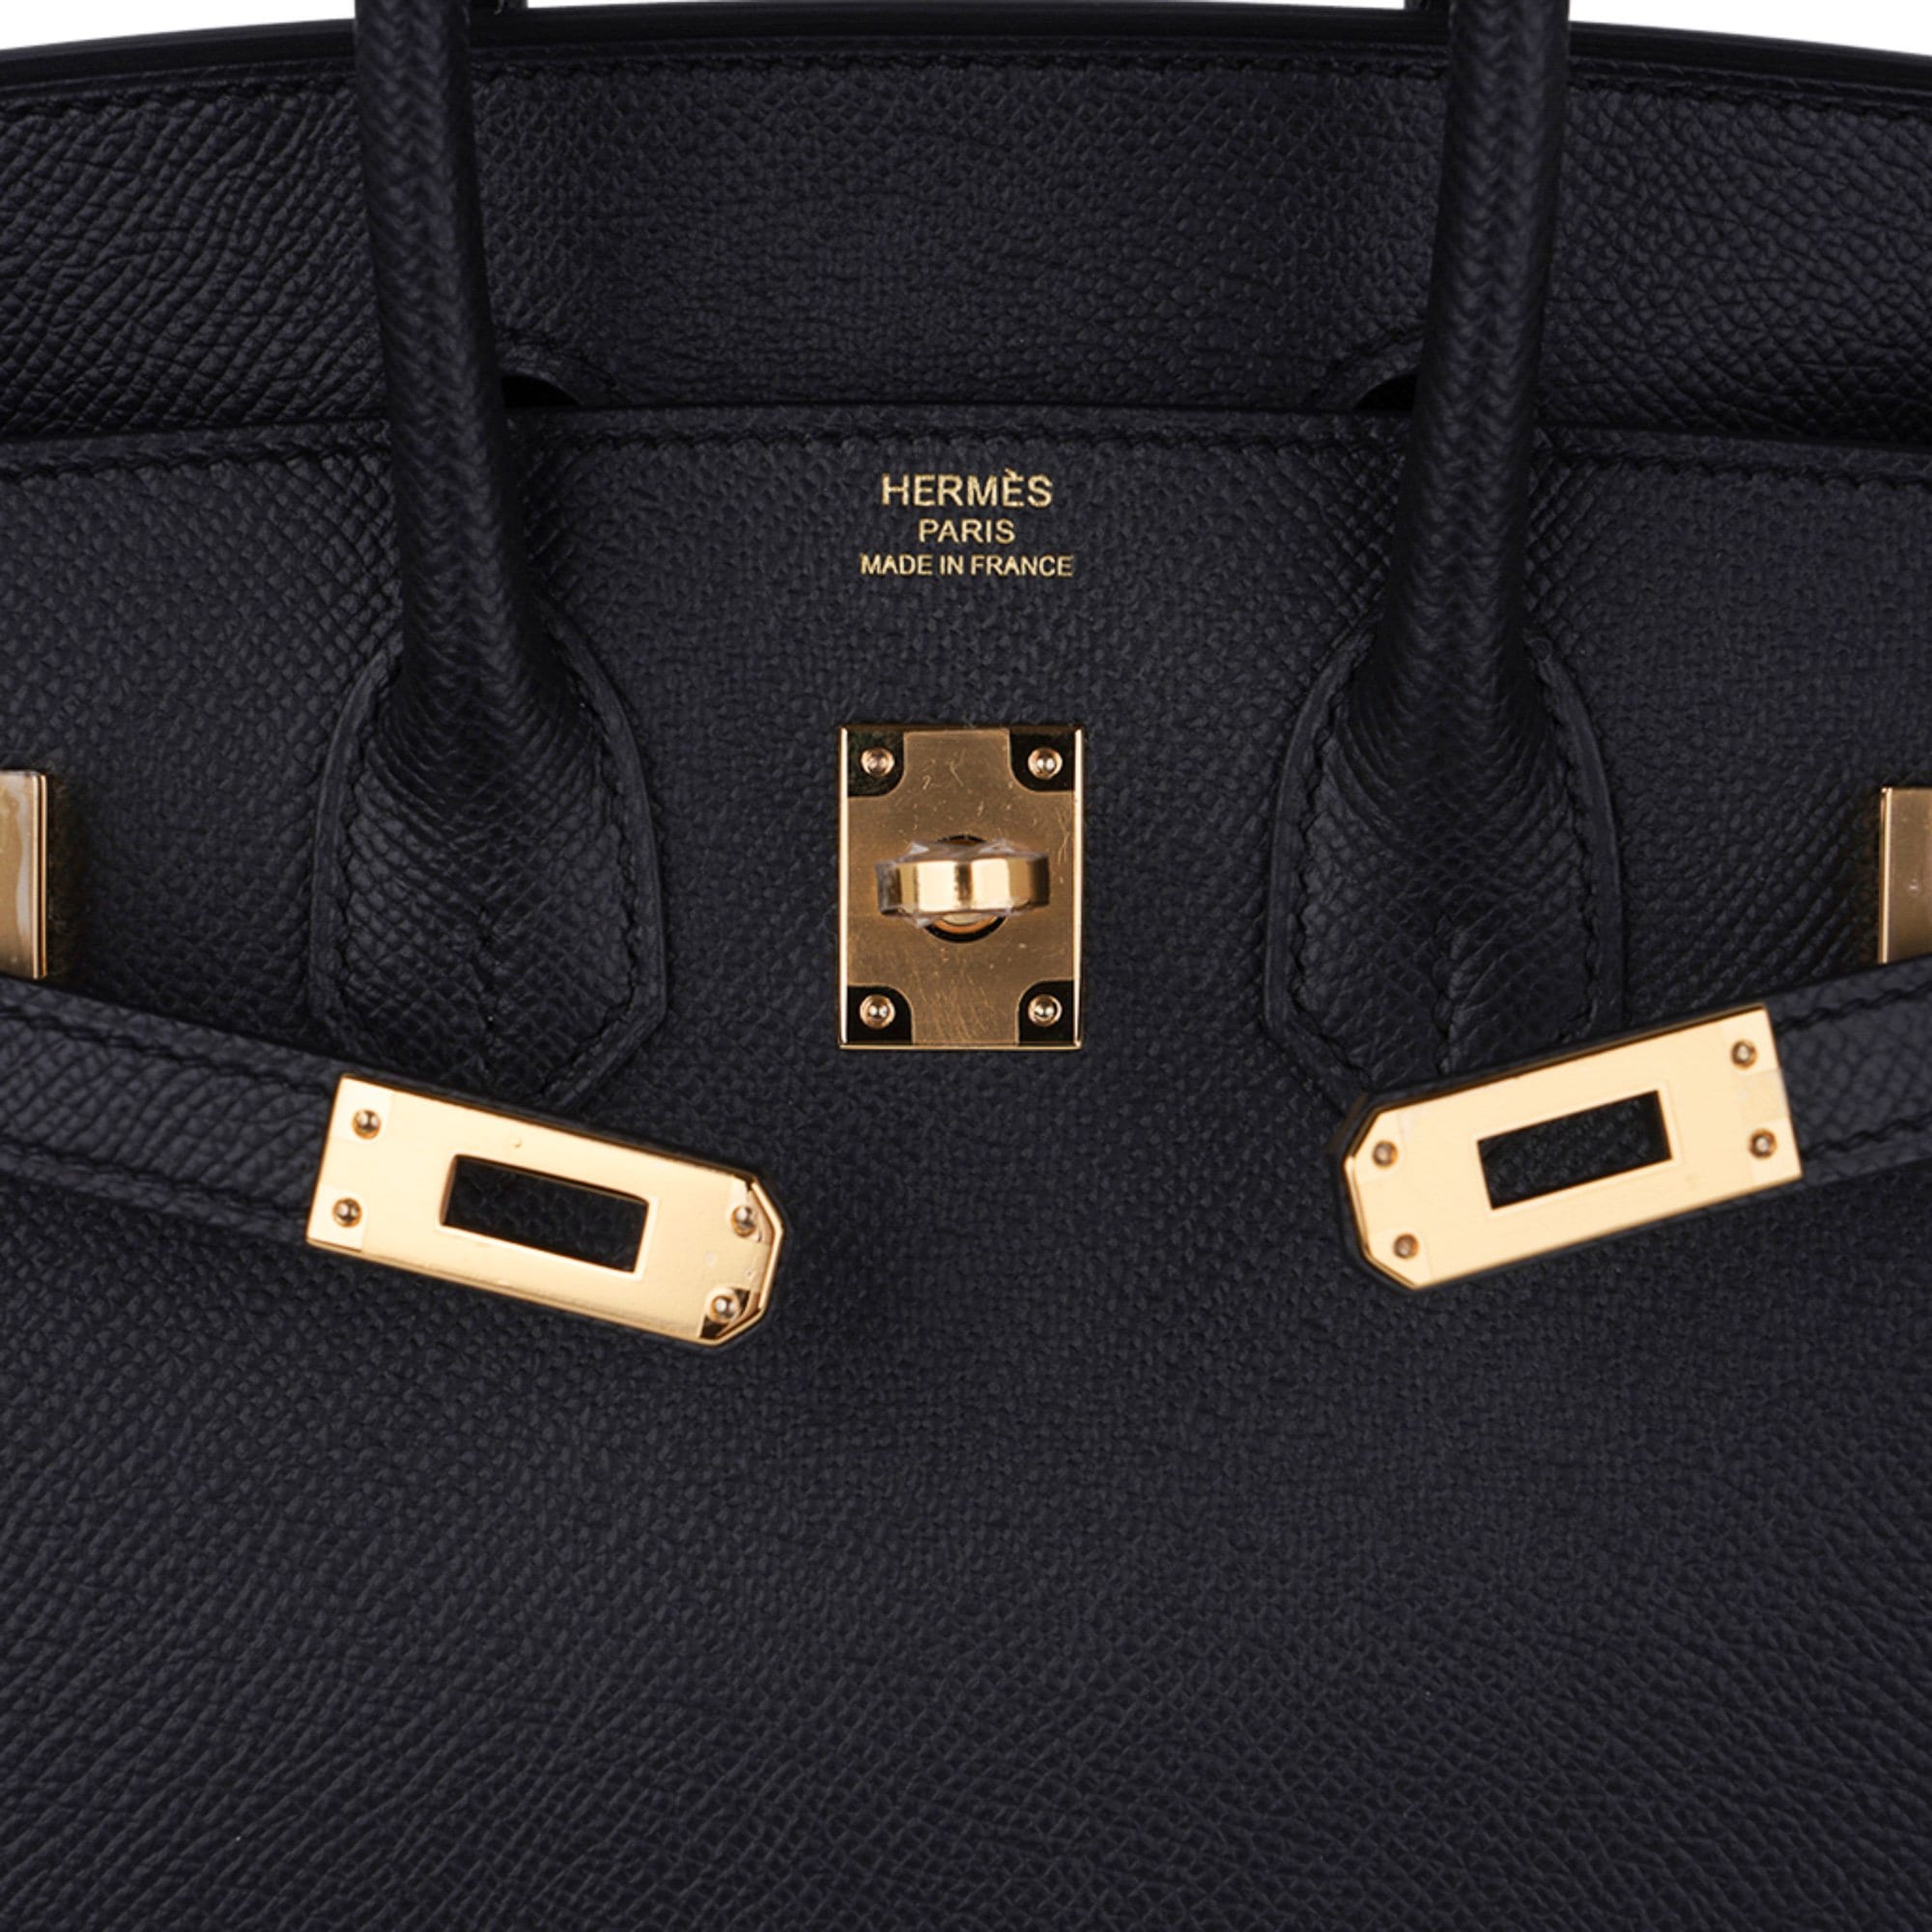 Hermès Black Sellier Kelly 25cm of Epsom Leather with Gold Hardware, Handbags and Accessories Online, 2019